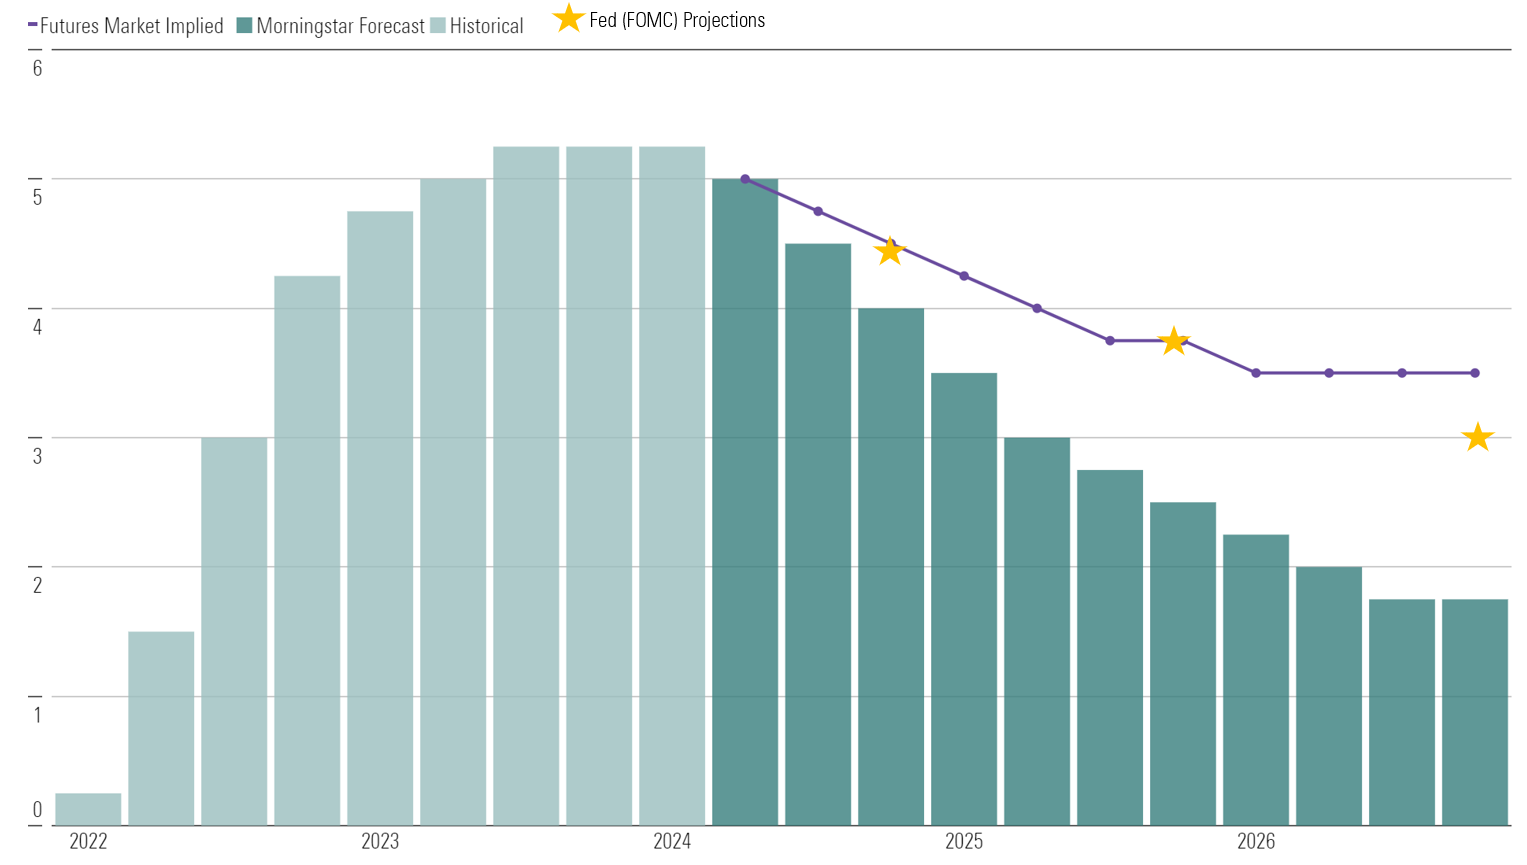 Graph shows Morningstar forecasts of the Federal Funds Rate compared to FOMC projections and market estimates.